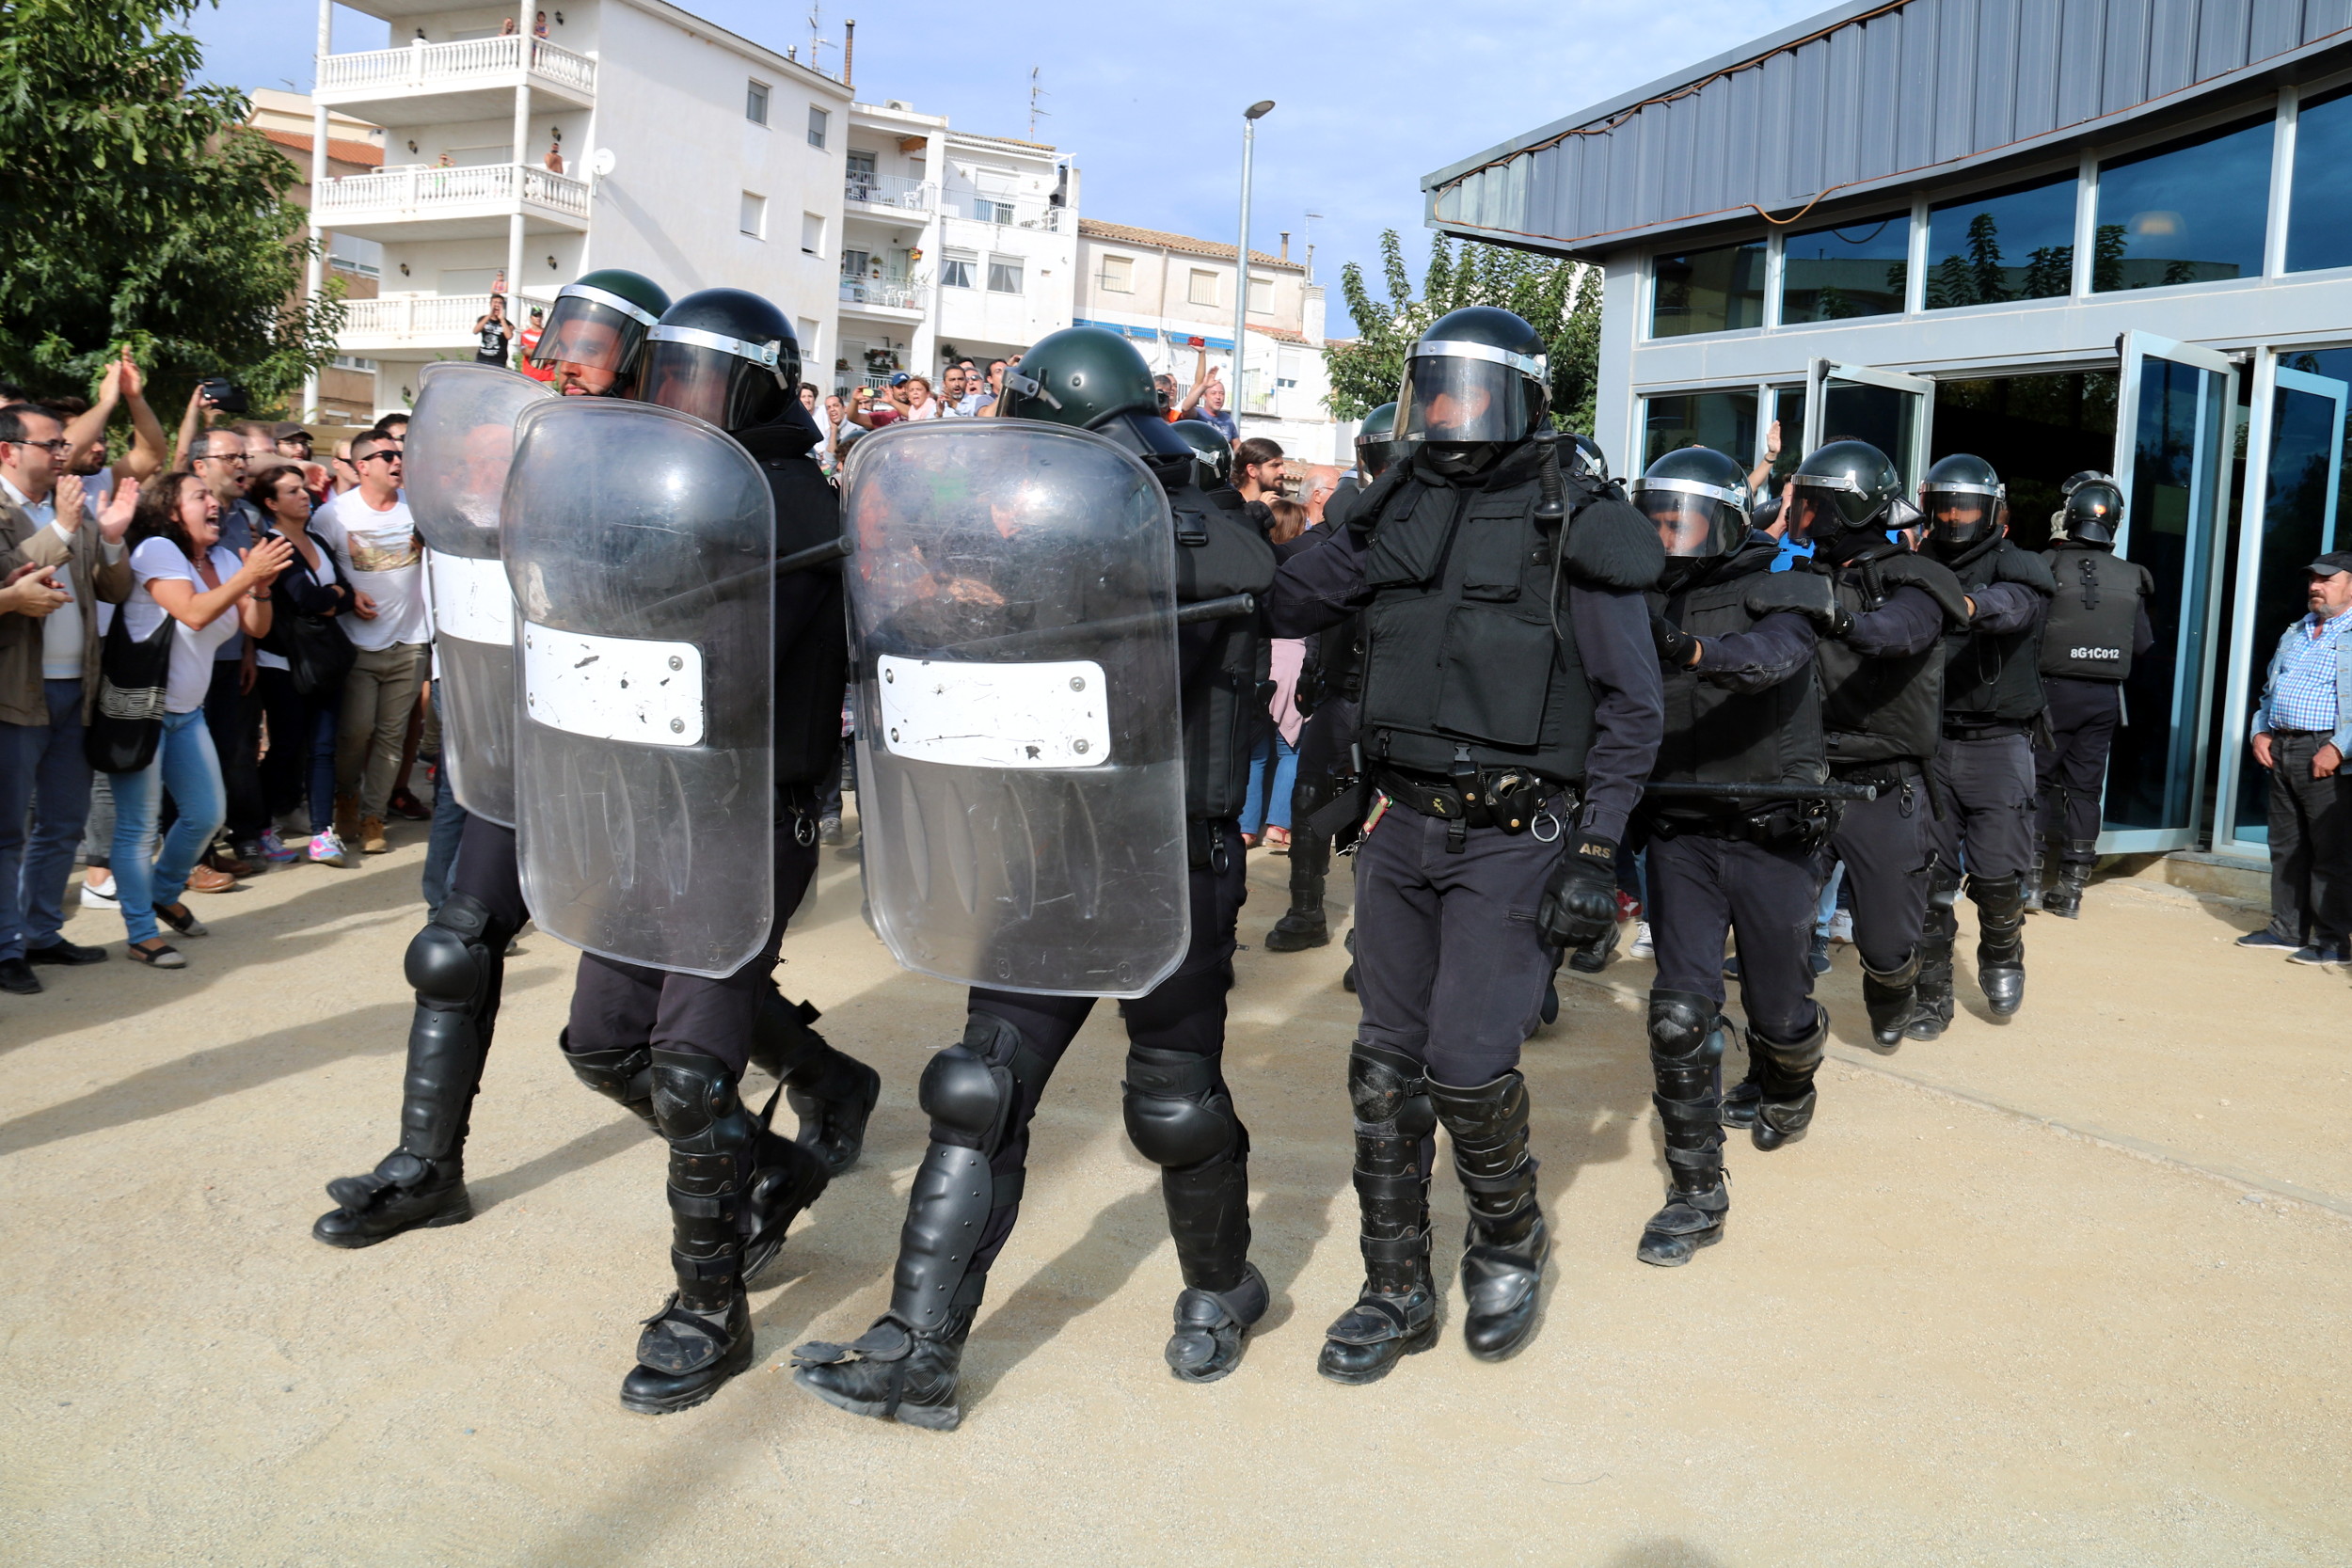 Spanish police in riot gear on the day of the independence referendum